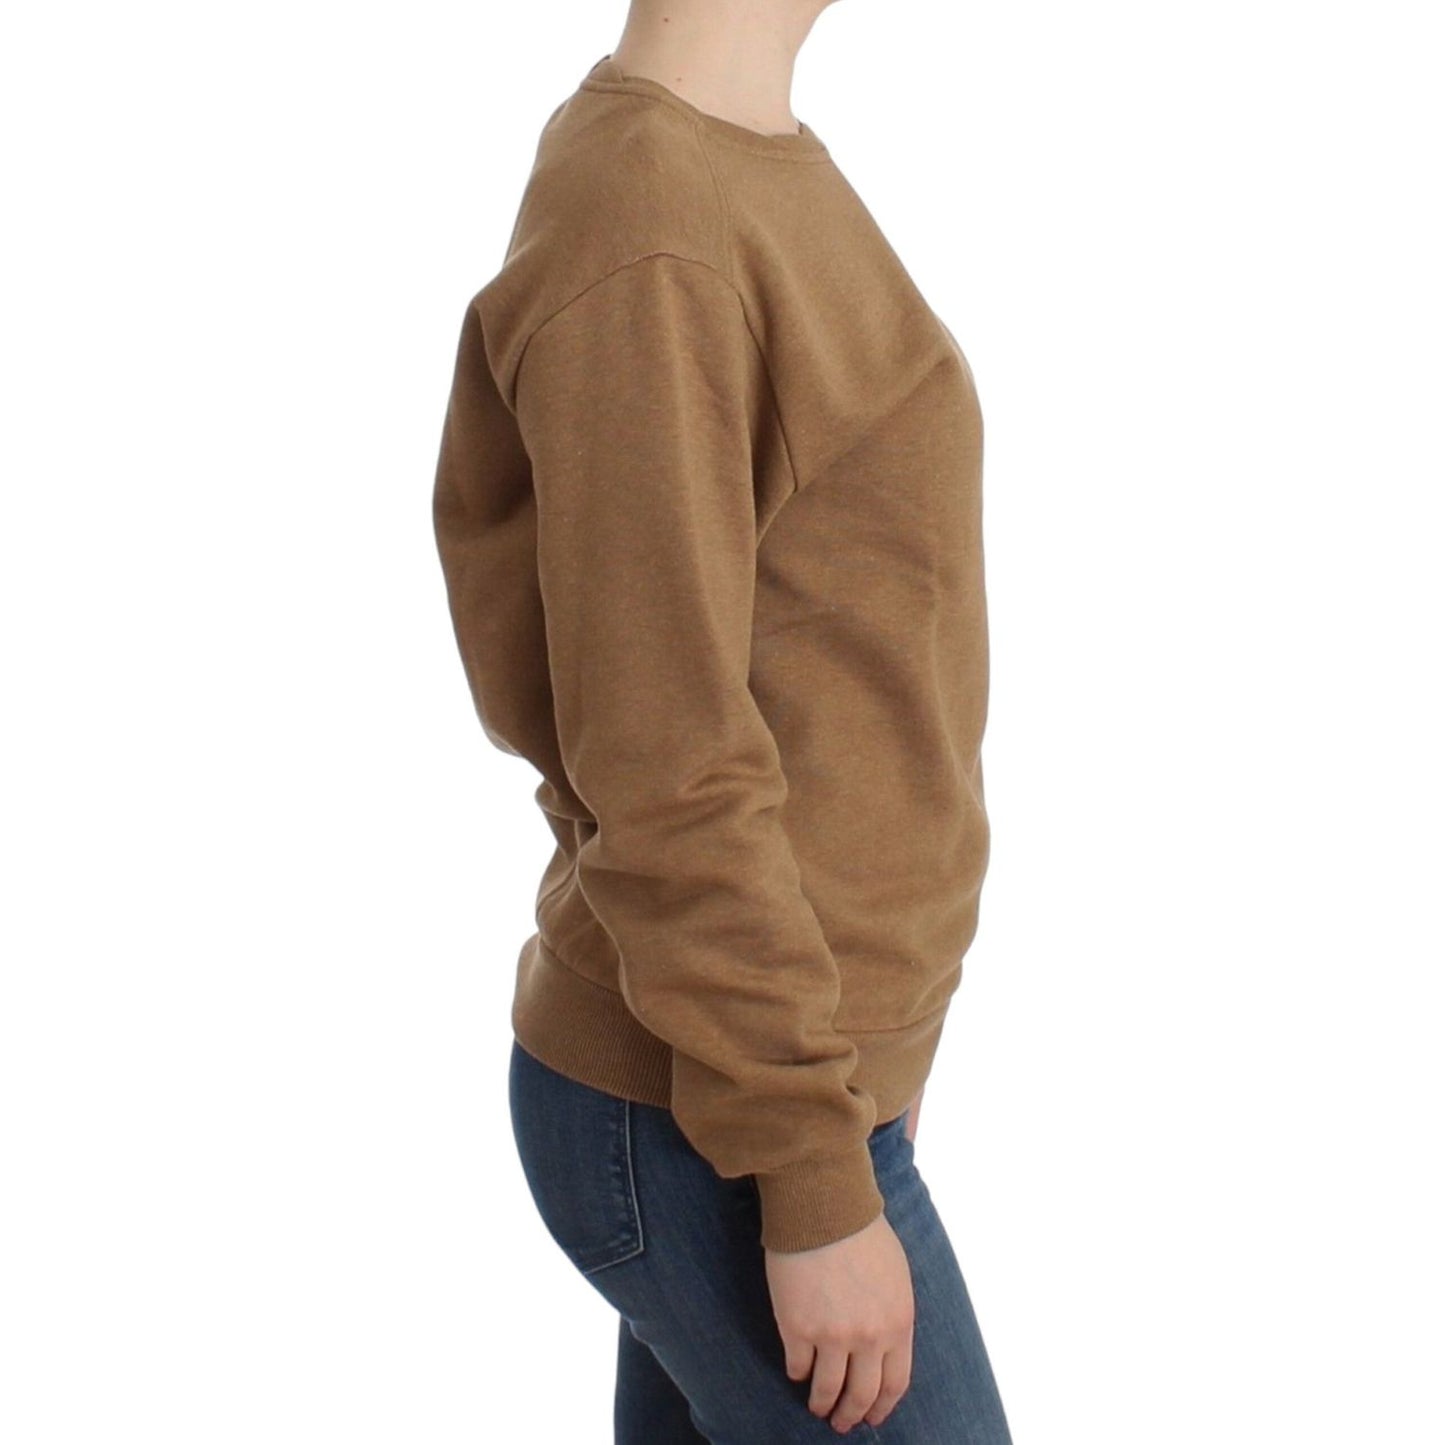 John Galliano Chic Brown Crewneck Cotton Sweater brown-crewneck-cotton-sweater 5844-brown-crewneck-cotton-sweater-3-scaled-676250be-a60.jpg